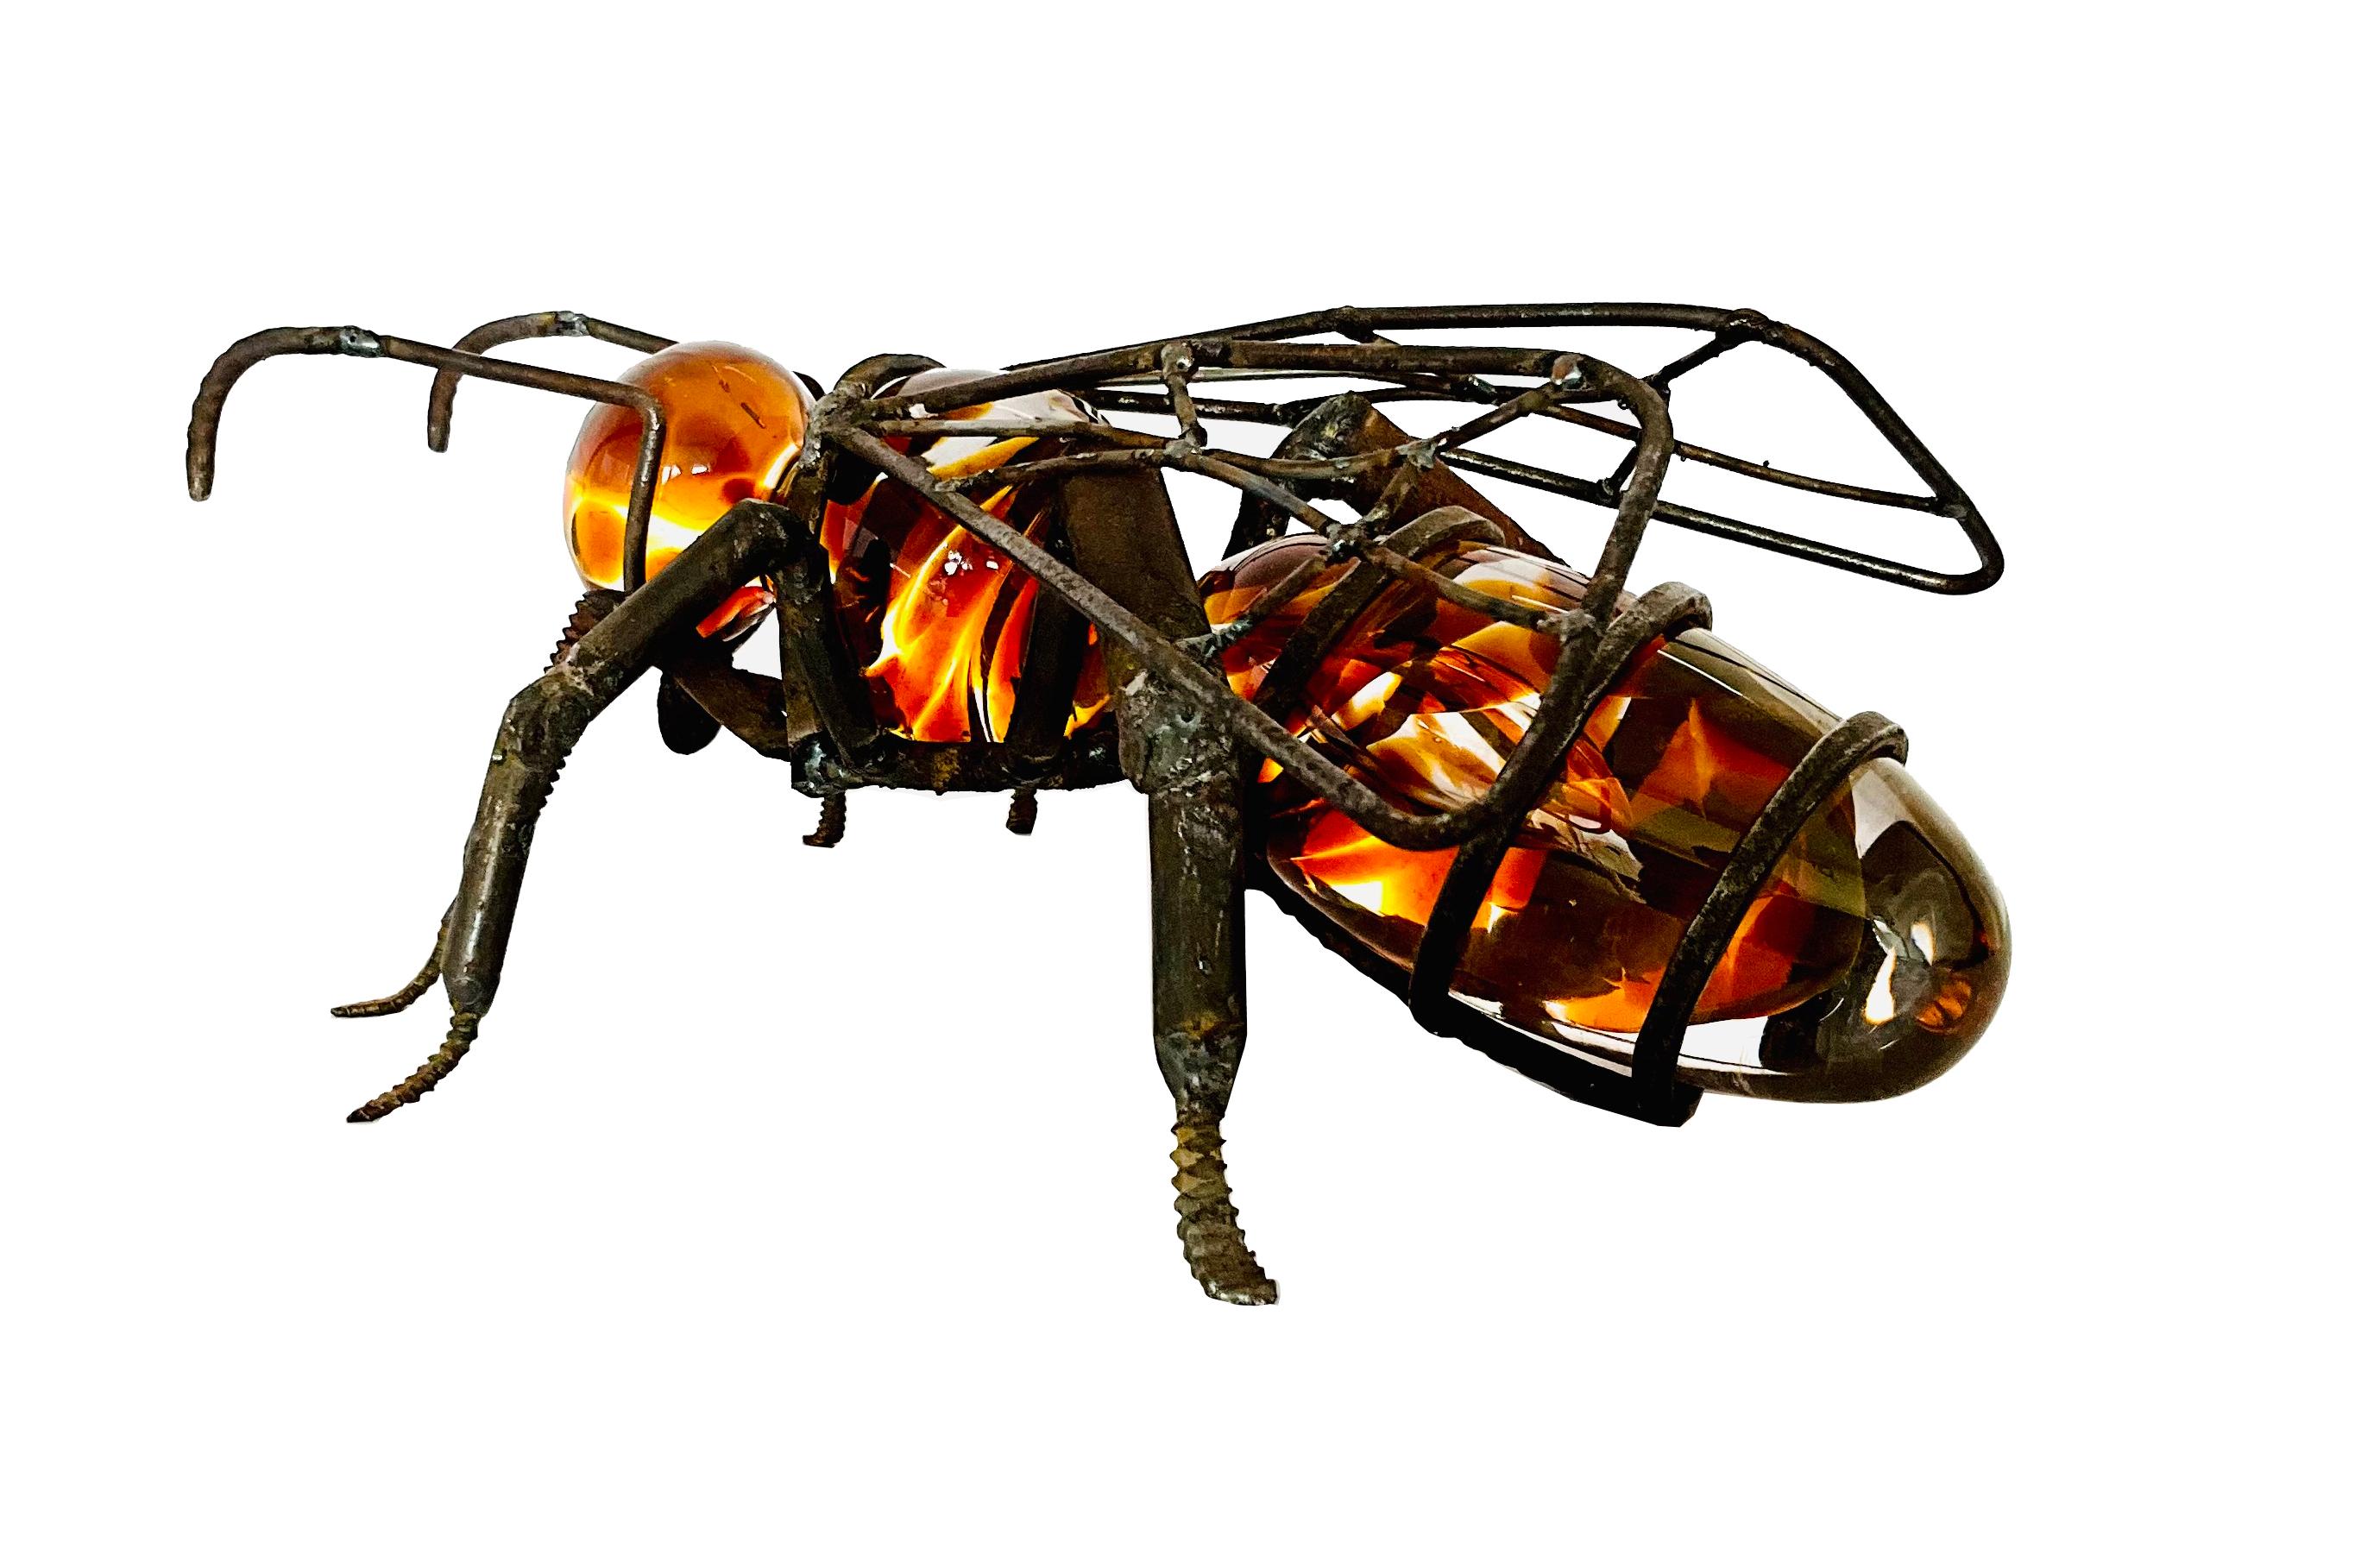 Hand-Blown Glass Bee, Recycled Steel and Crystal Parts - Contemporary Sculpture by Marcos Romero Gallardo